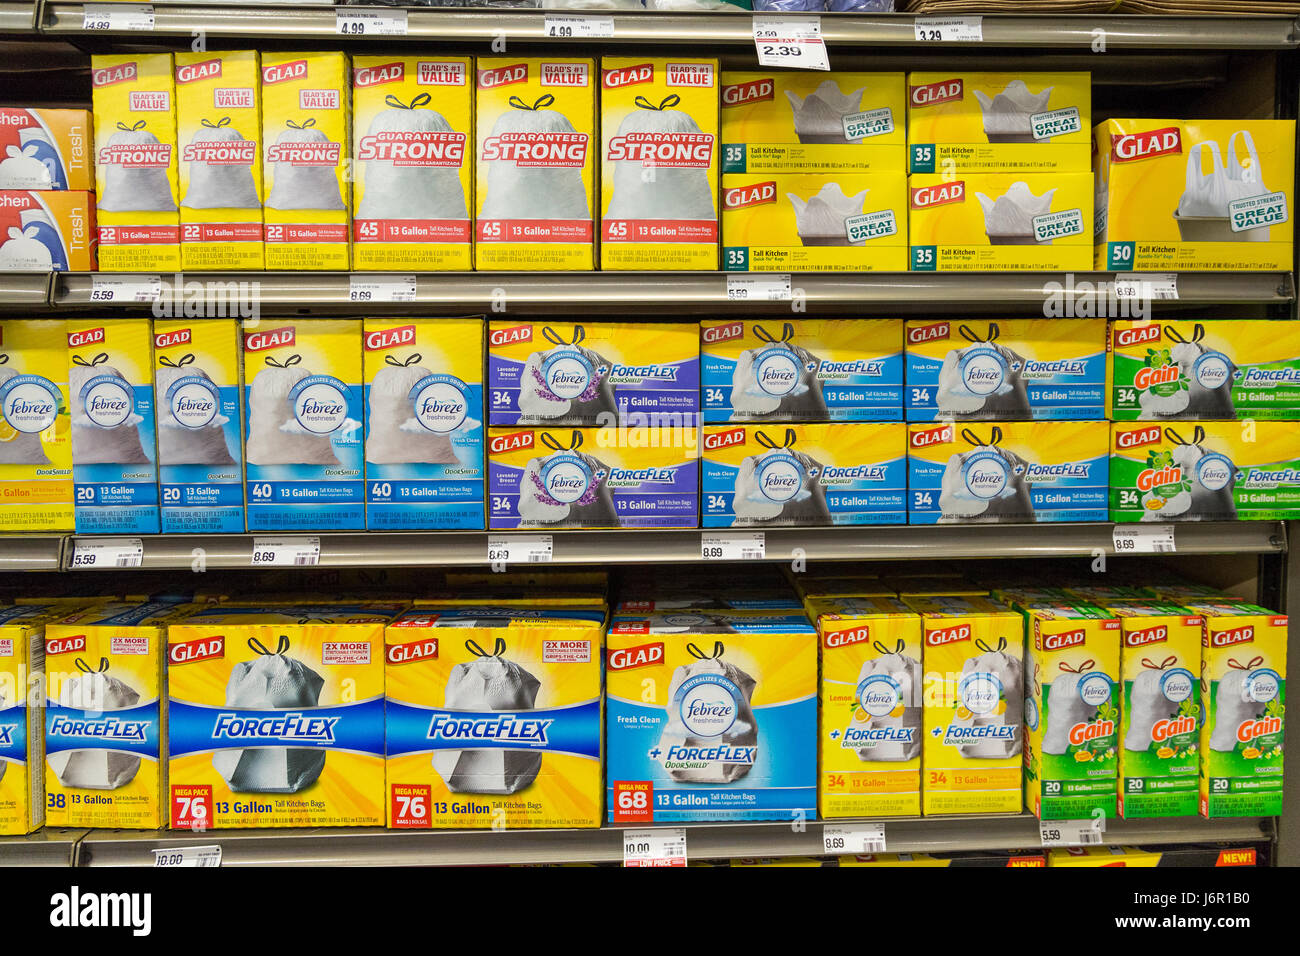 https://c8.alamy.com/comp/J6R1B0/boxes-of-glad-brand-garbage-bags-on-the-shelves-of-a-grocery-store-J6R1B0.jpg